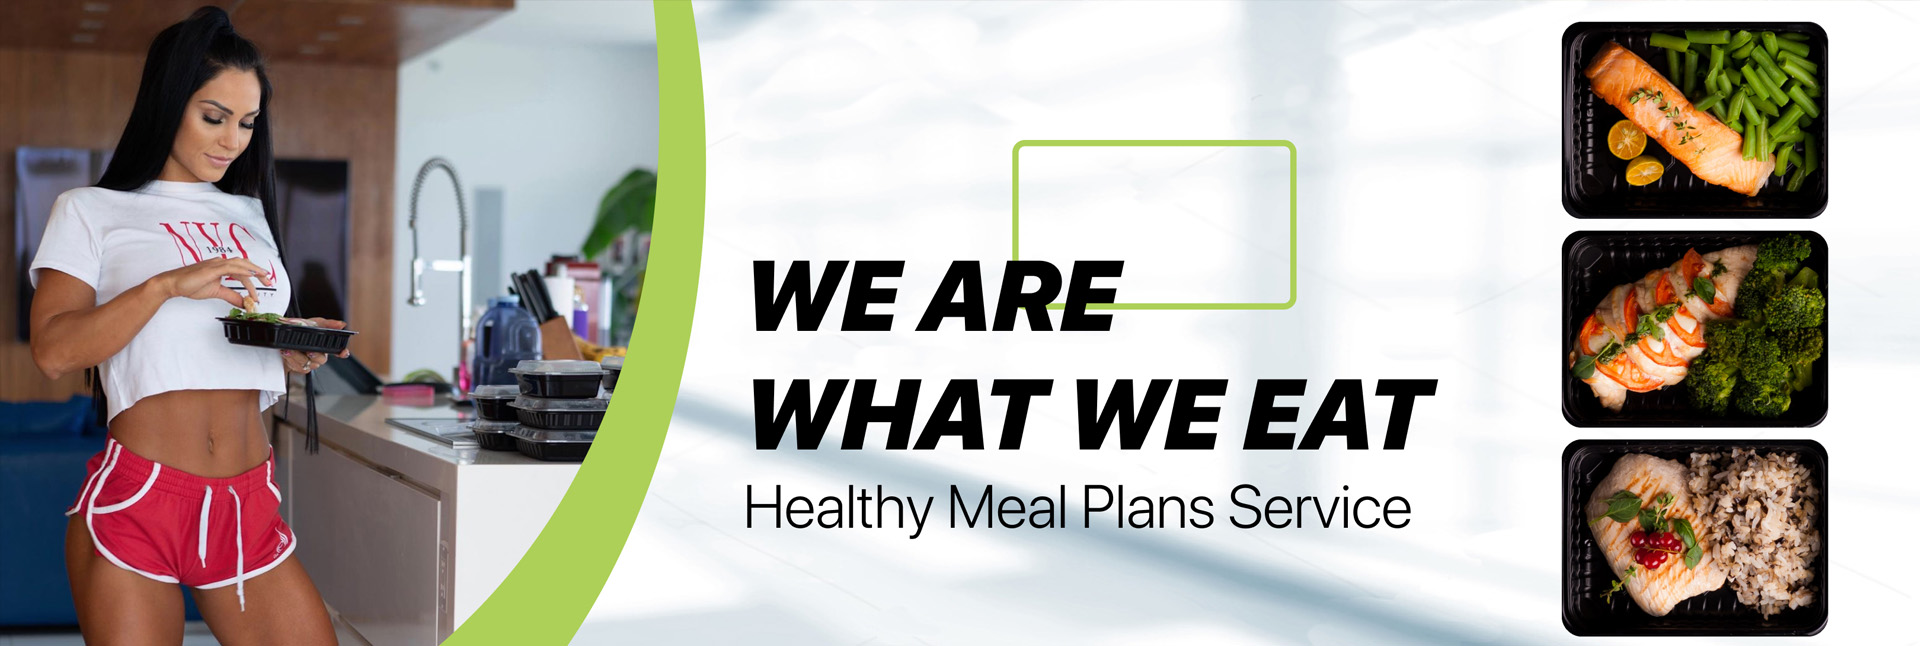 meal planning service near me